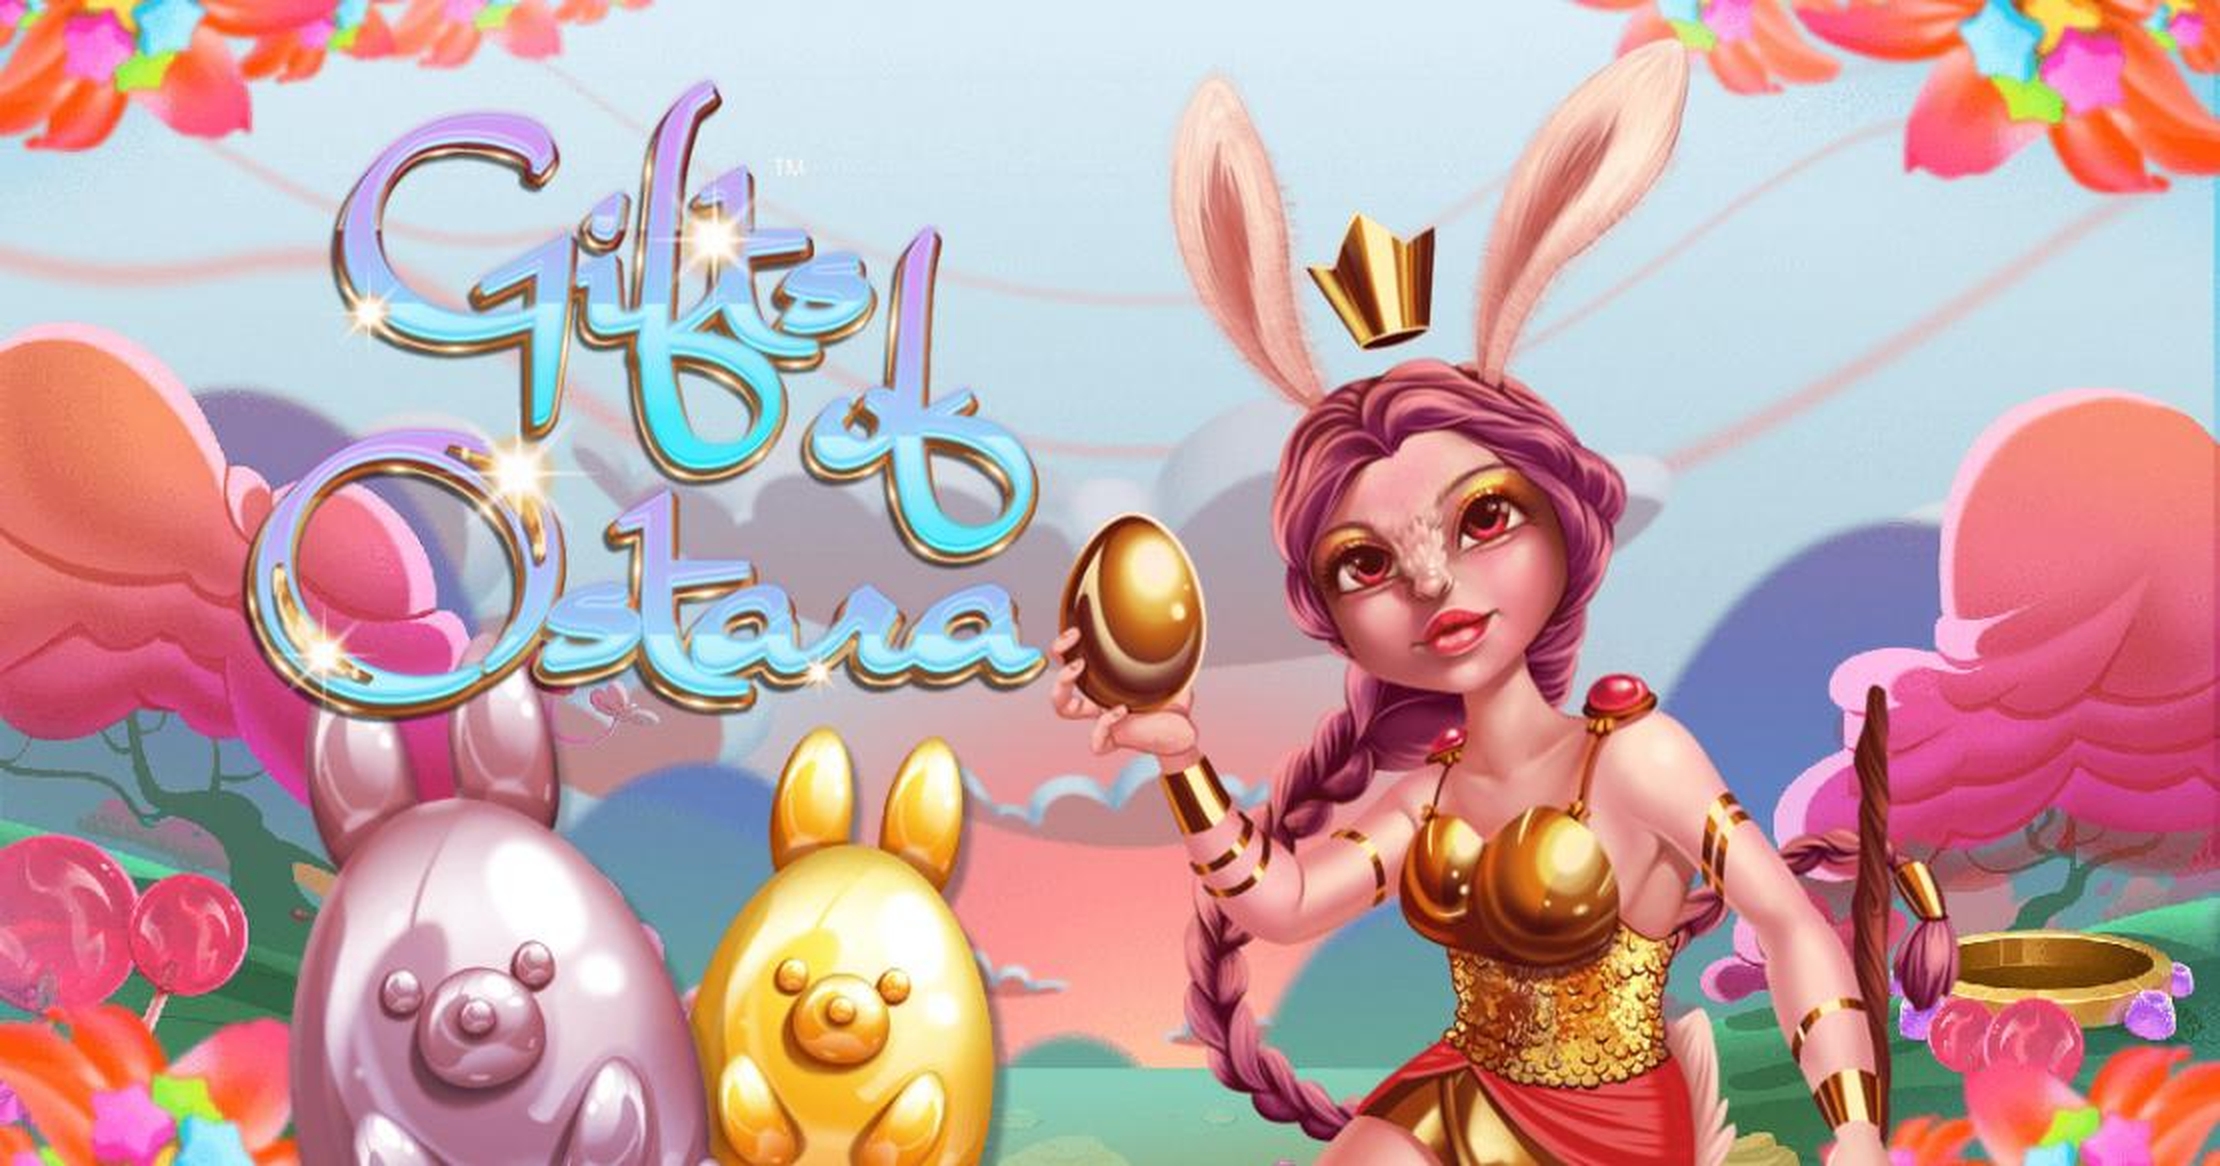 The Gifts of Ostara Online Slot Demo Game by Iron Dog Studios